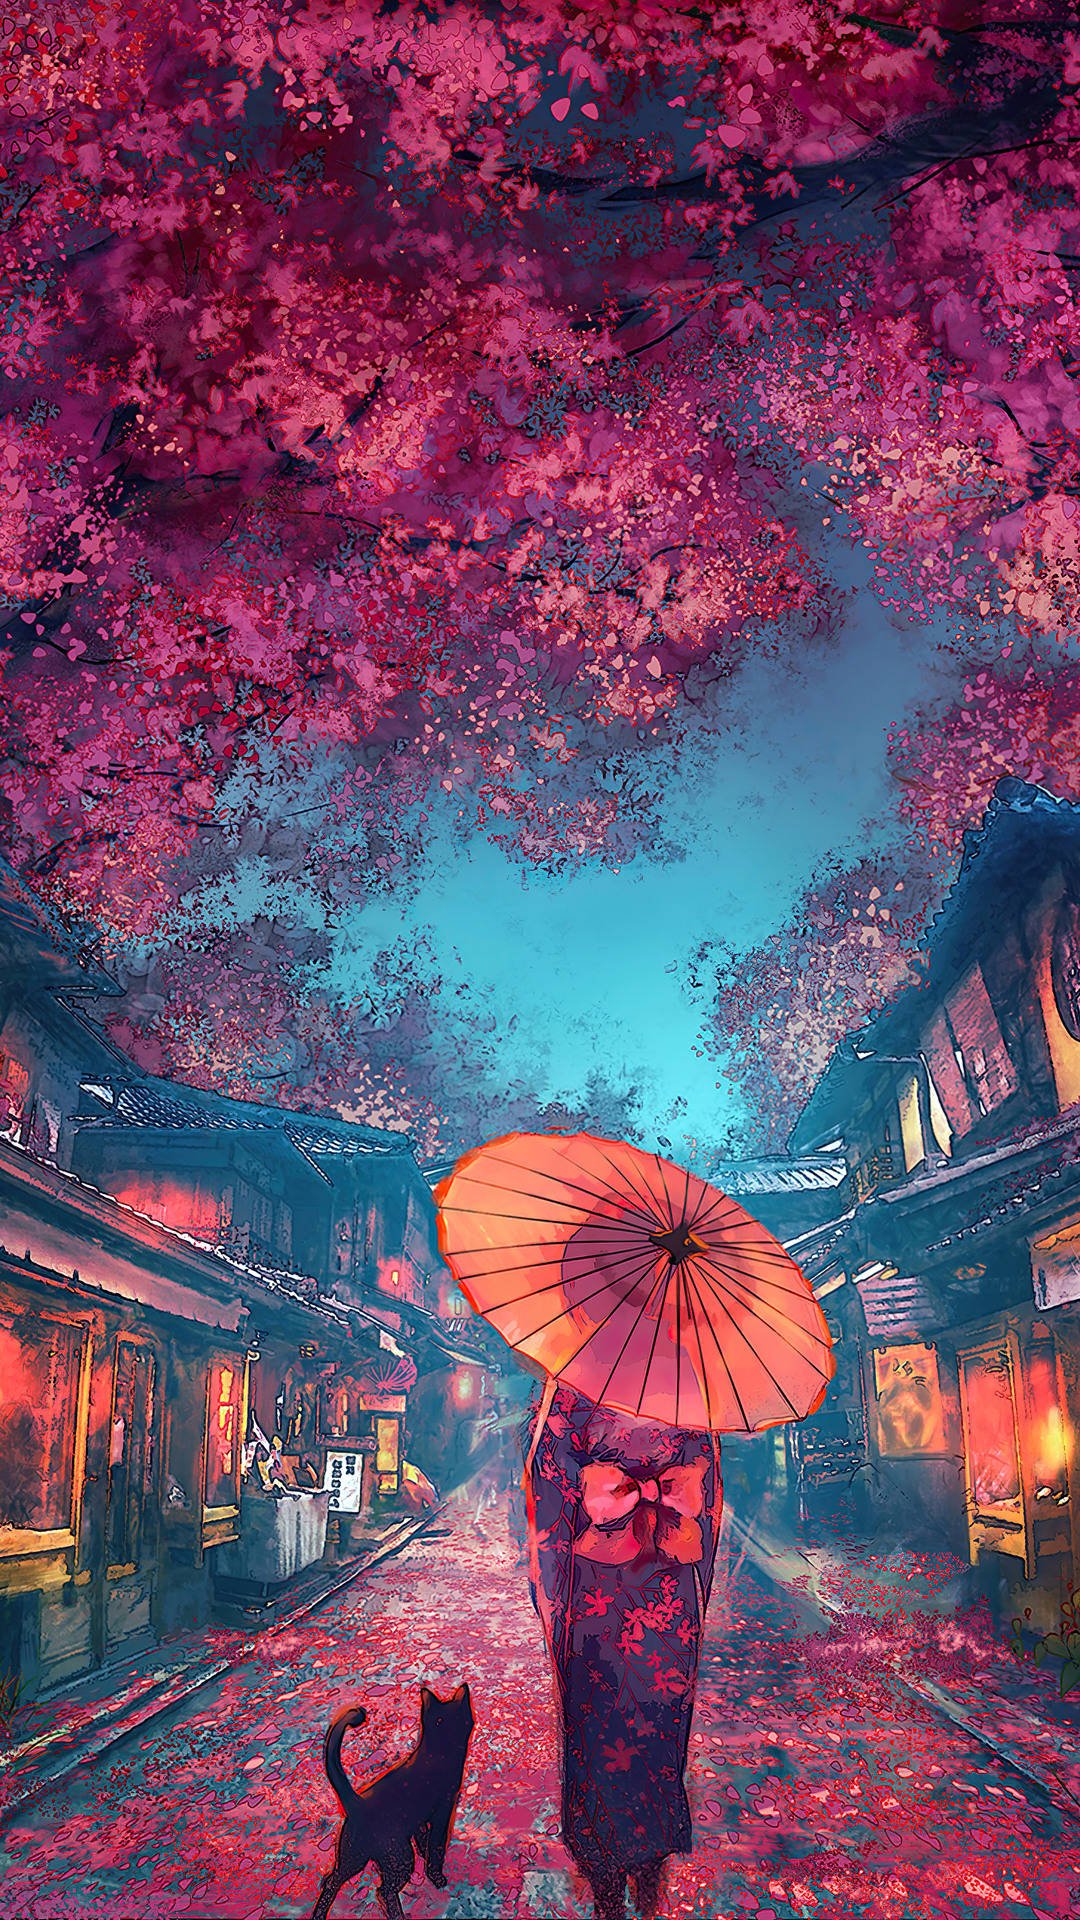 Pink Japanese Aesthetic Wallpapers